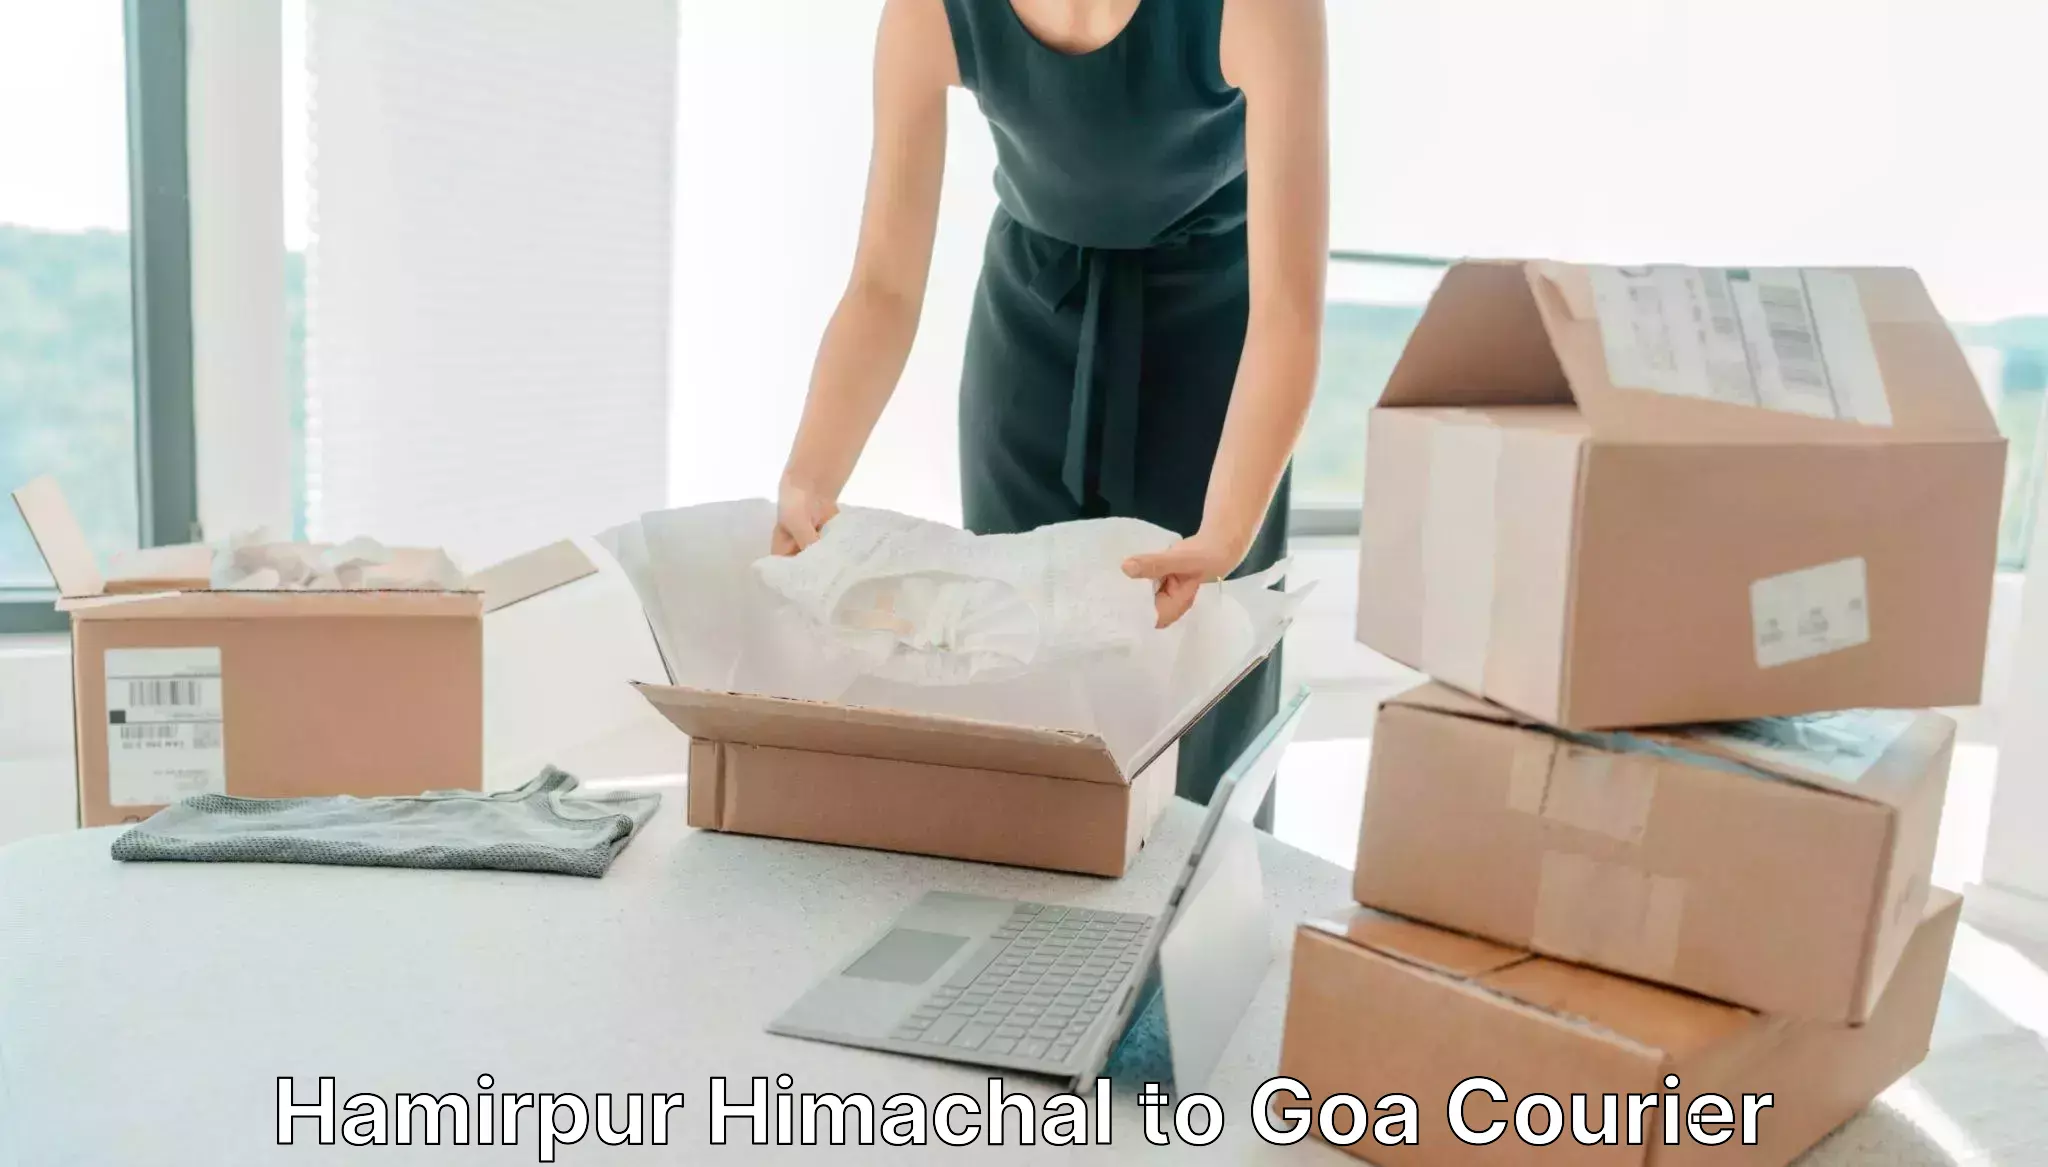 Cost-effective freight solutions Hamirpur Himachal to Goa